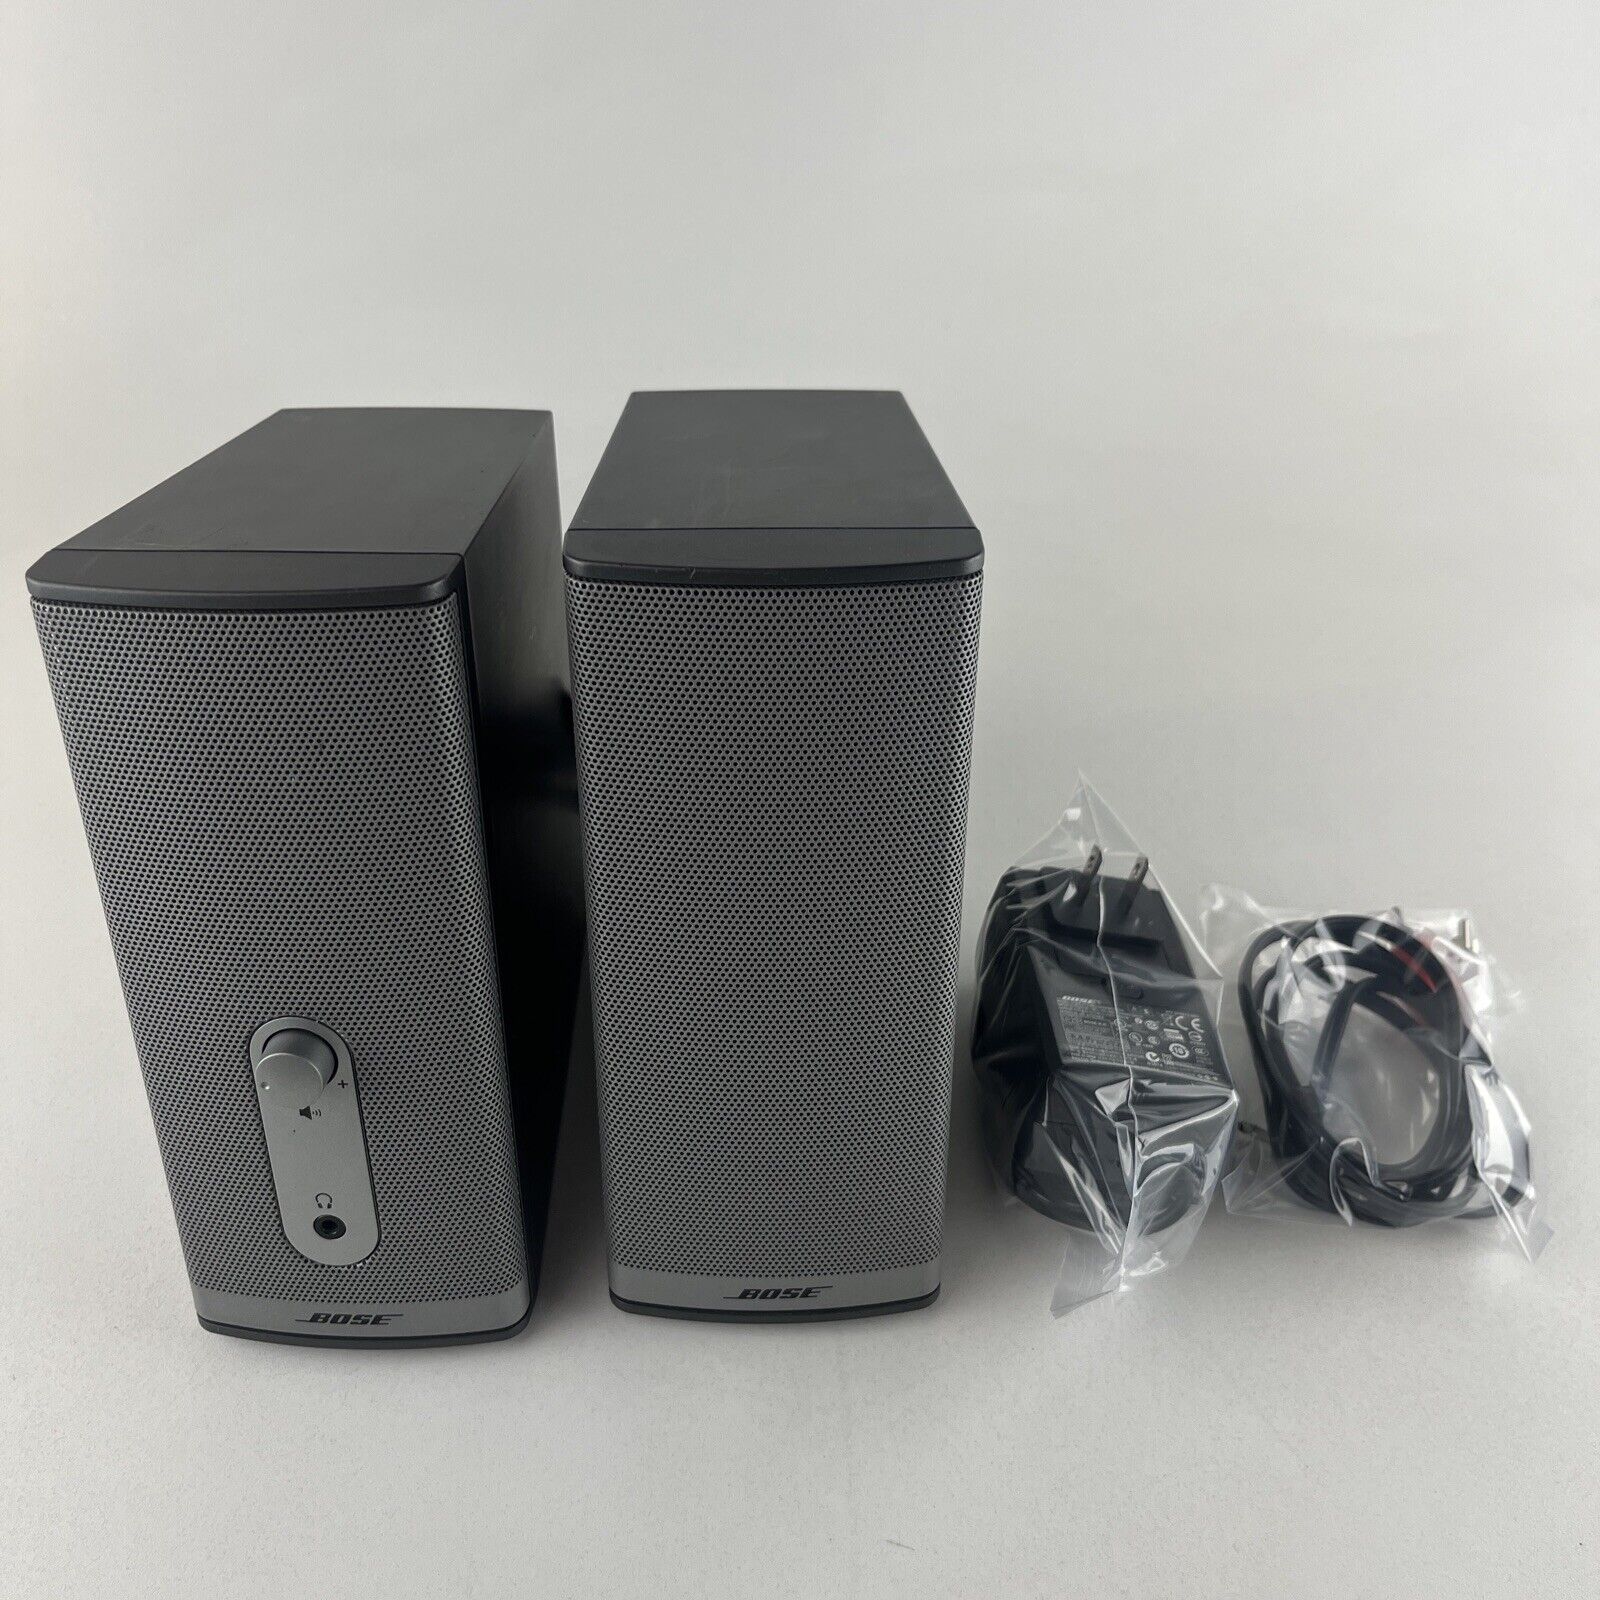 Bose Companion 2 Series II Computers Speakers | Tested & Working